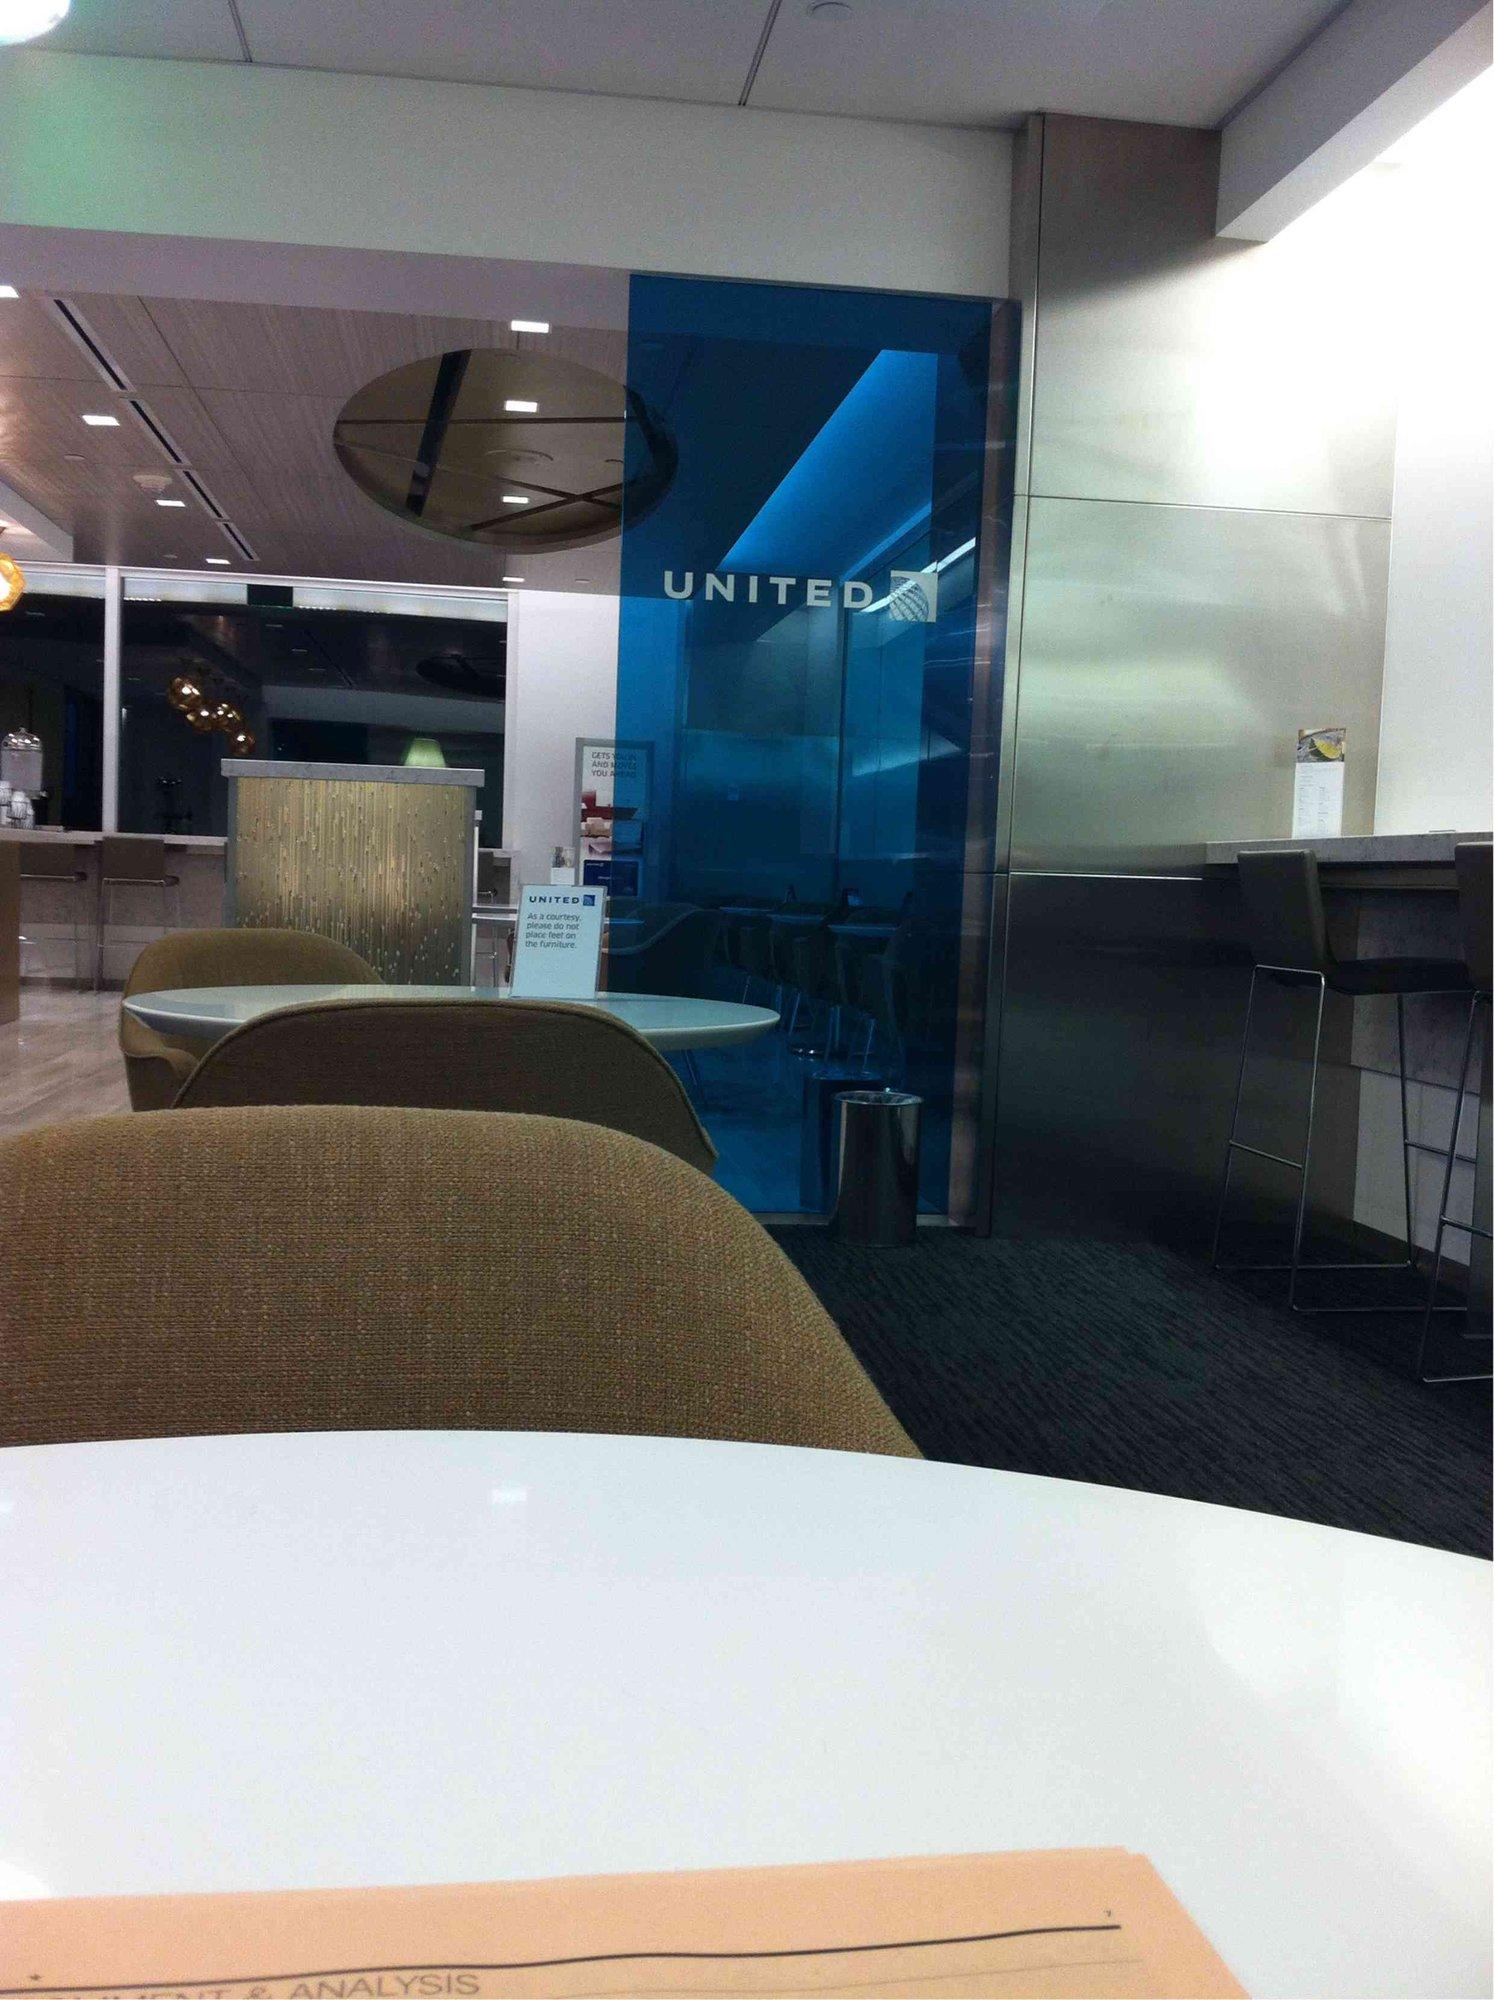 United Airlines United Club image 2 of 57